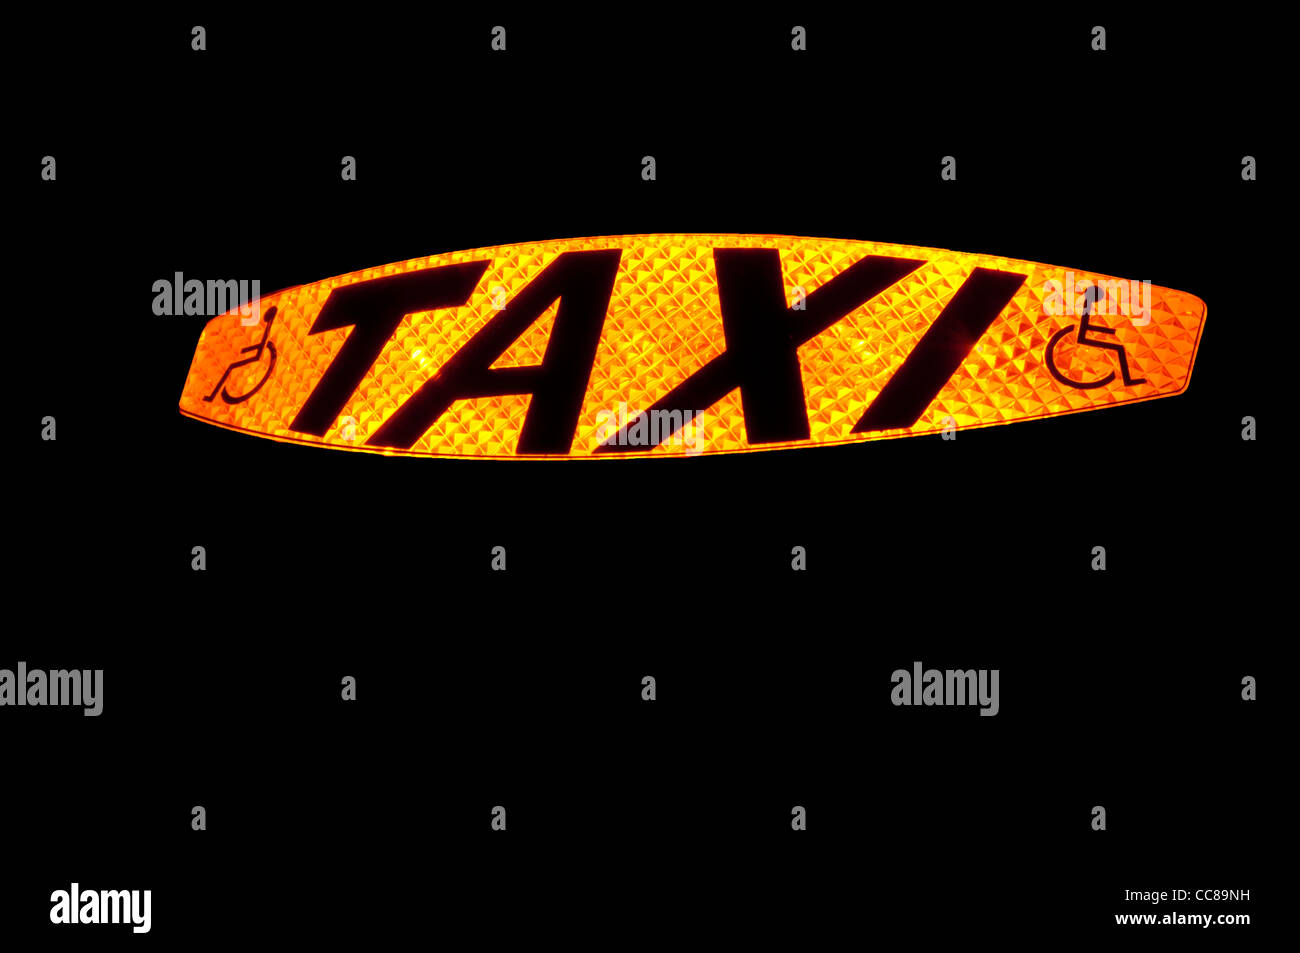 Illuminated Taxi sign showing the word Taxi and a disabled symbol to show a wheelchair accessible vehicle Stock Photo